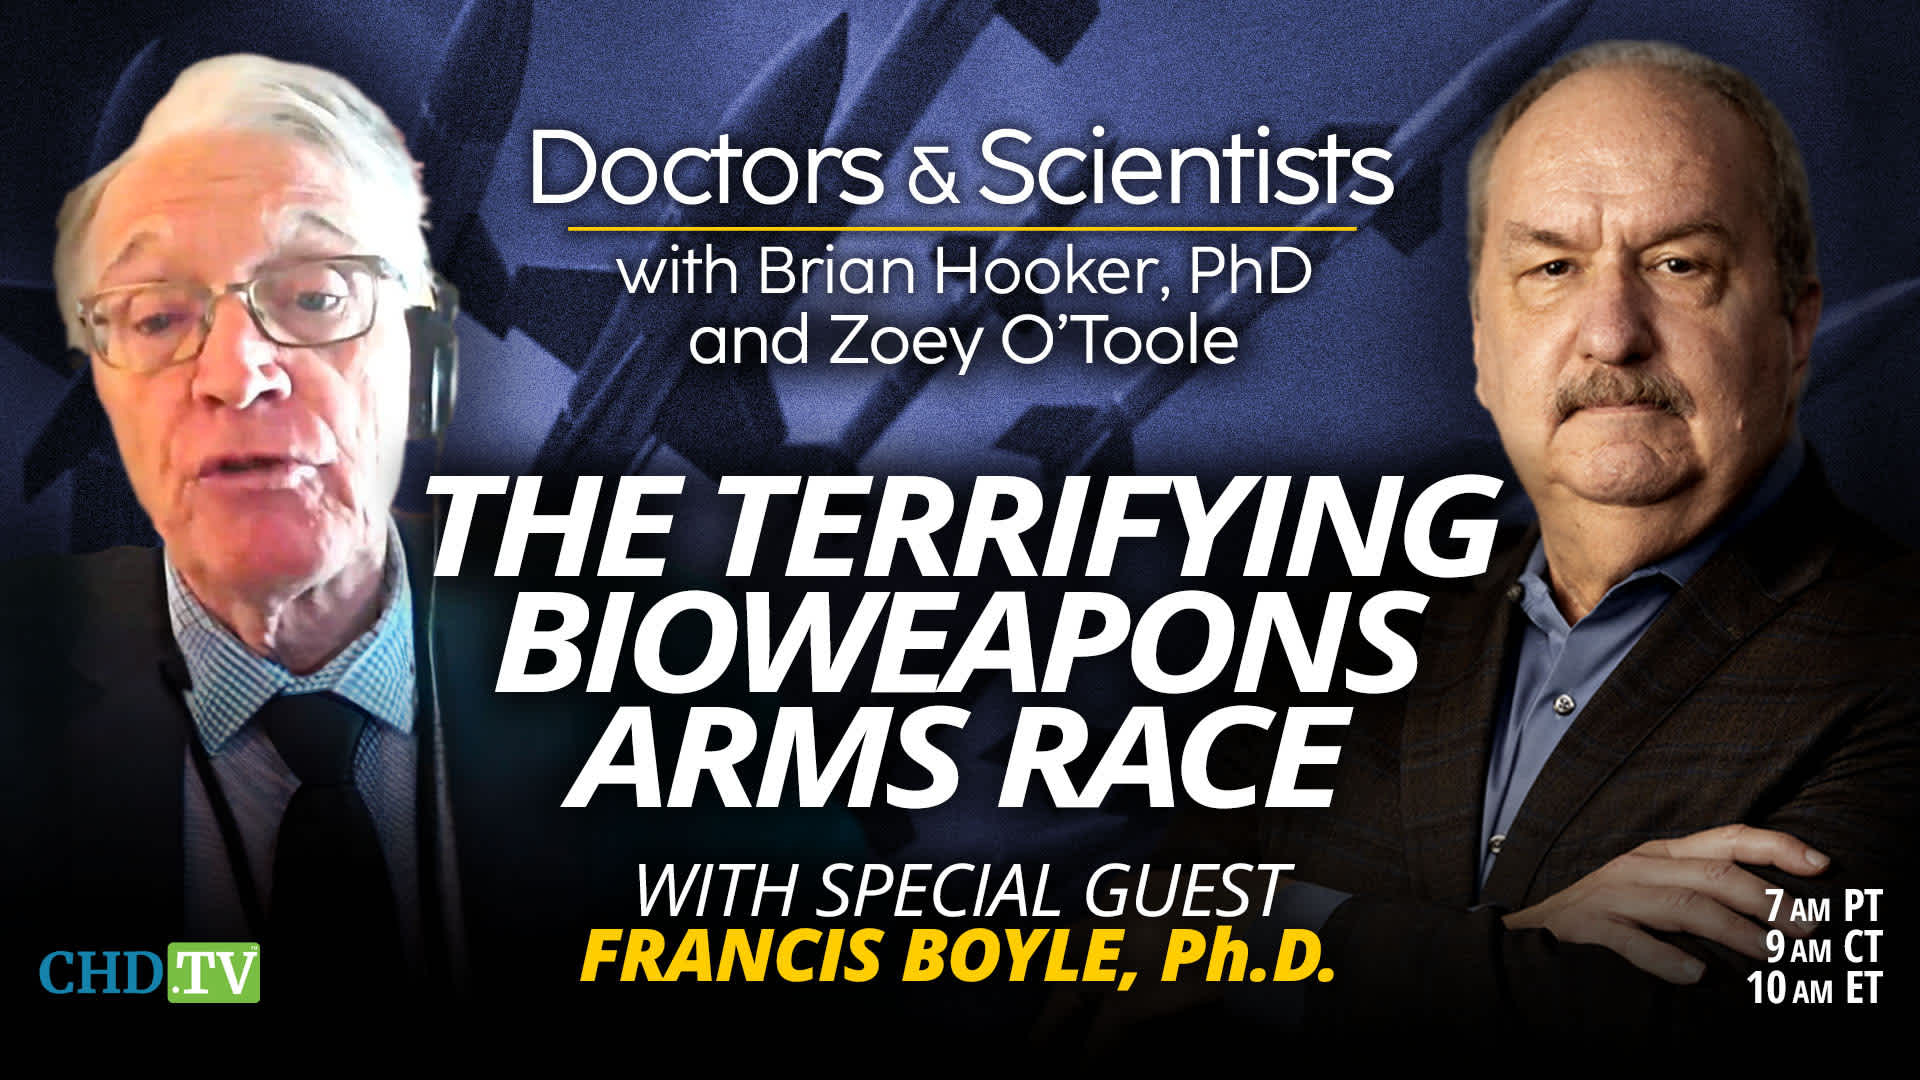 The Terrifying Bioweapons Arms Race With Francis Boyle, Ph.D.